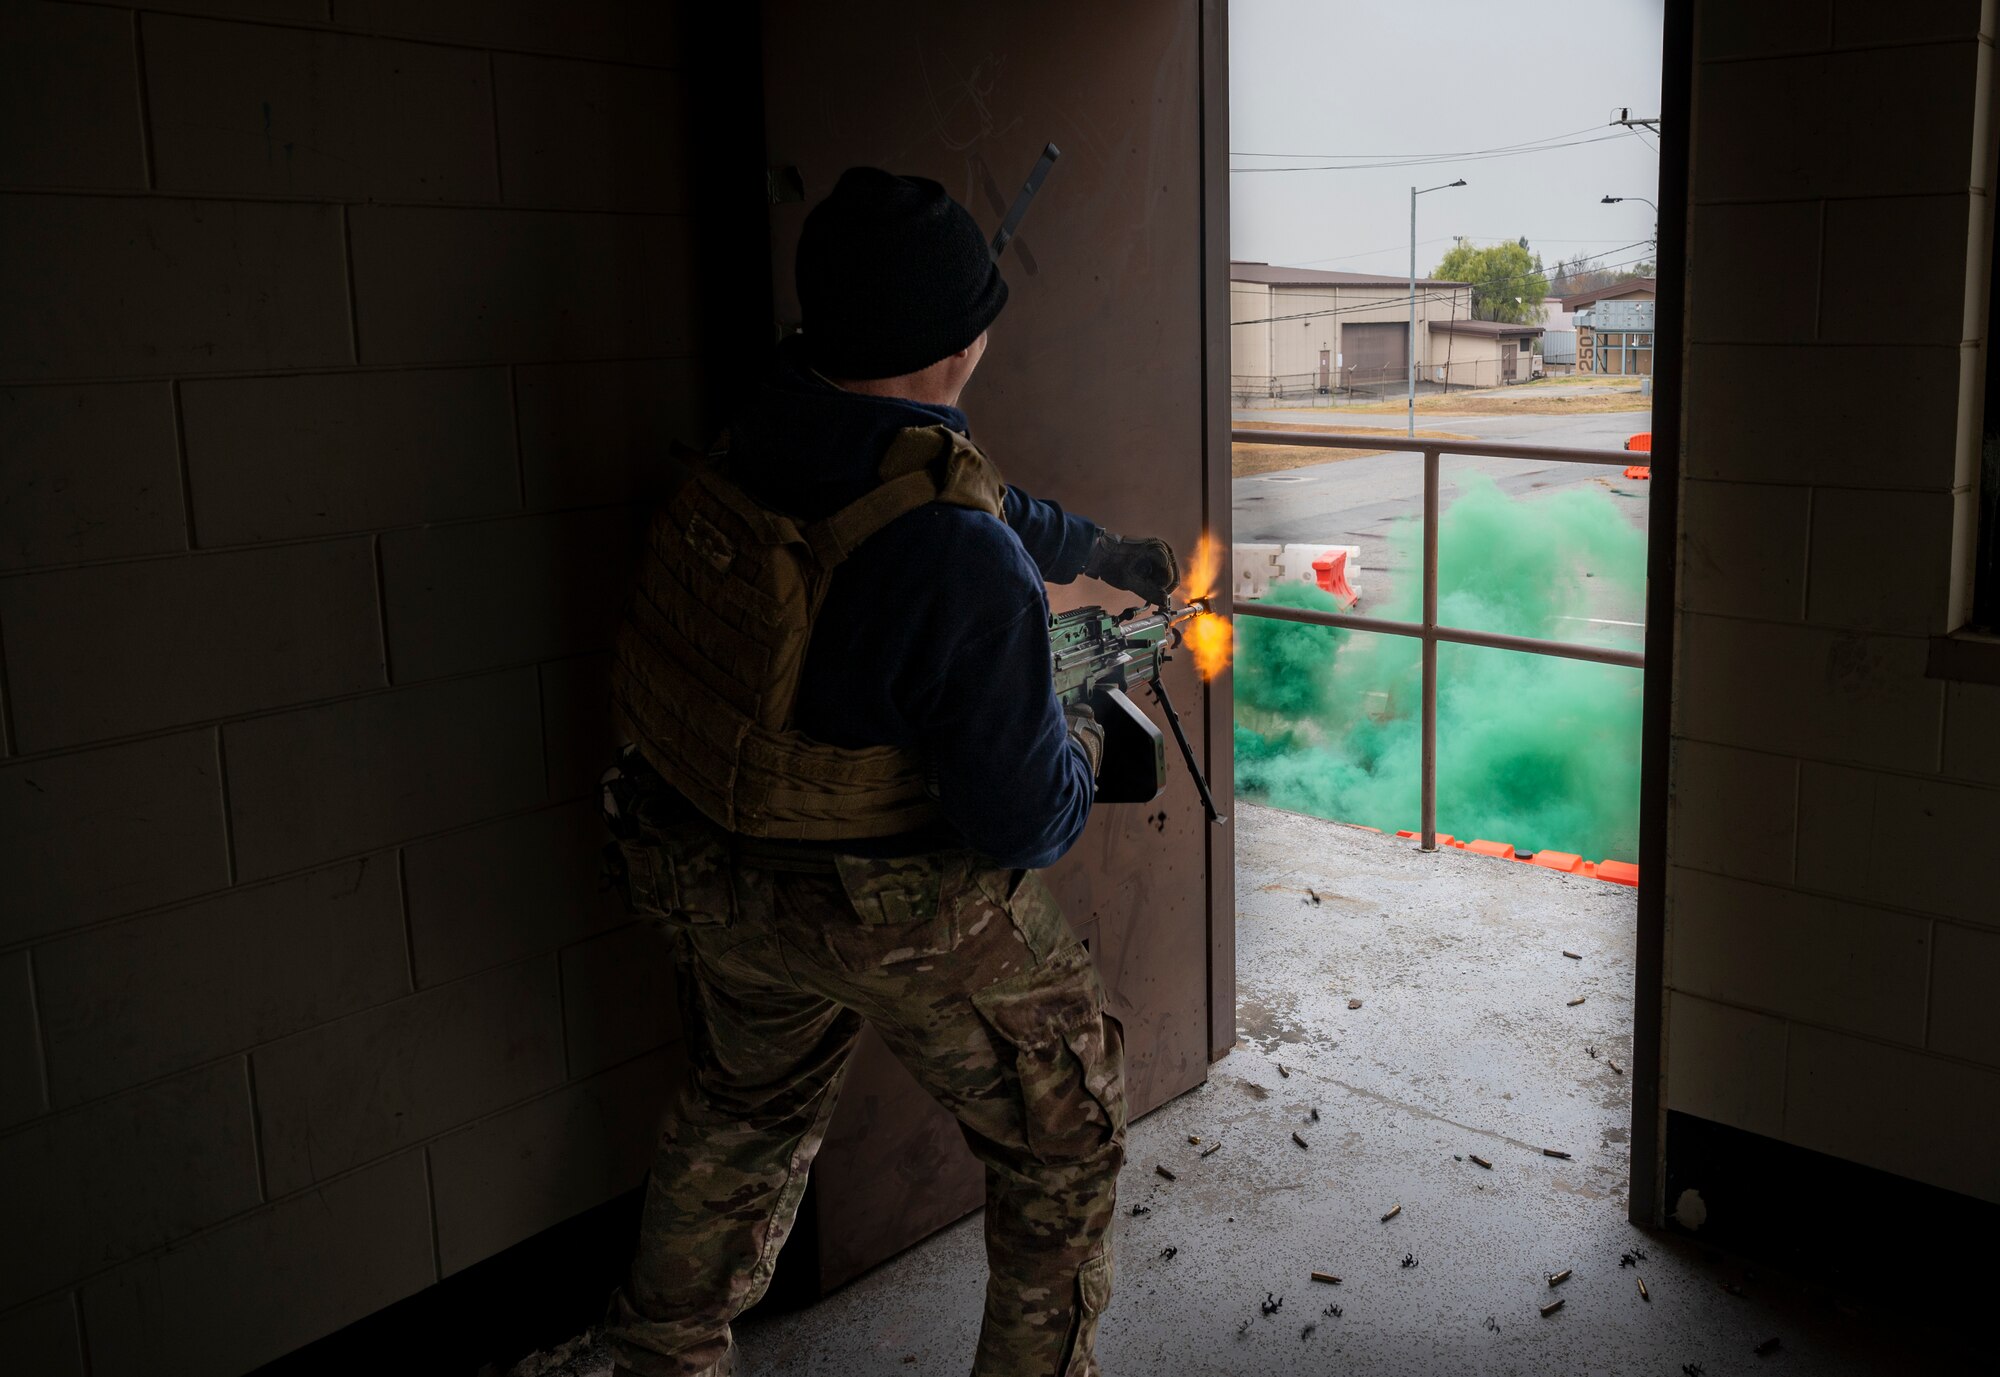 U.S. Air Force Staff Sgt. William McLaughlin, 51st Security Forces Squadron (SFS) combat arms instructor, fires blanks from a M240 machine gun during a joint Combat Readiness Course (CRC) with Republic of Korea Military Policemen at Osan Air Base, ROK, Nov. 3, 2022.